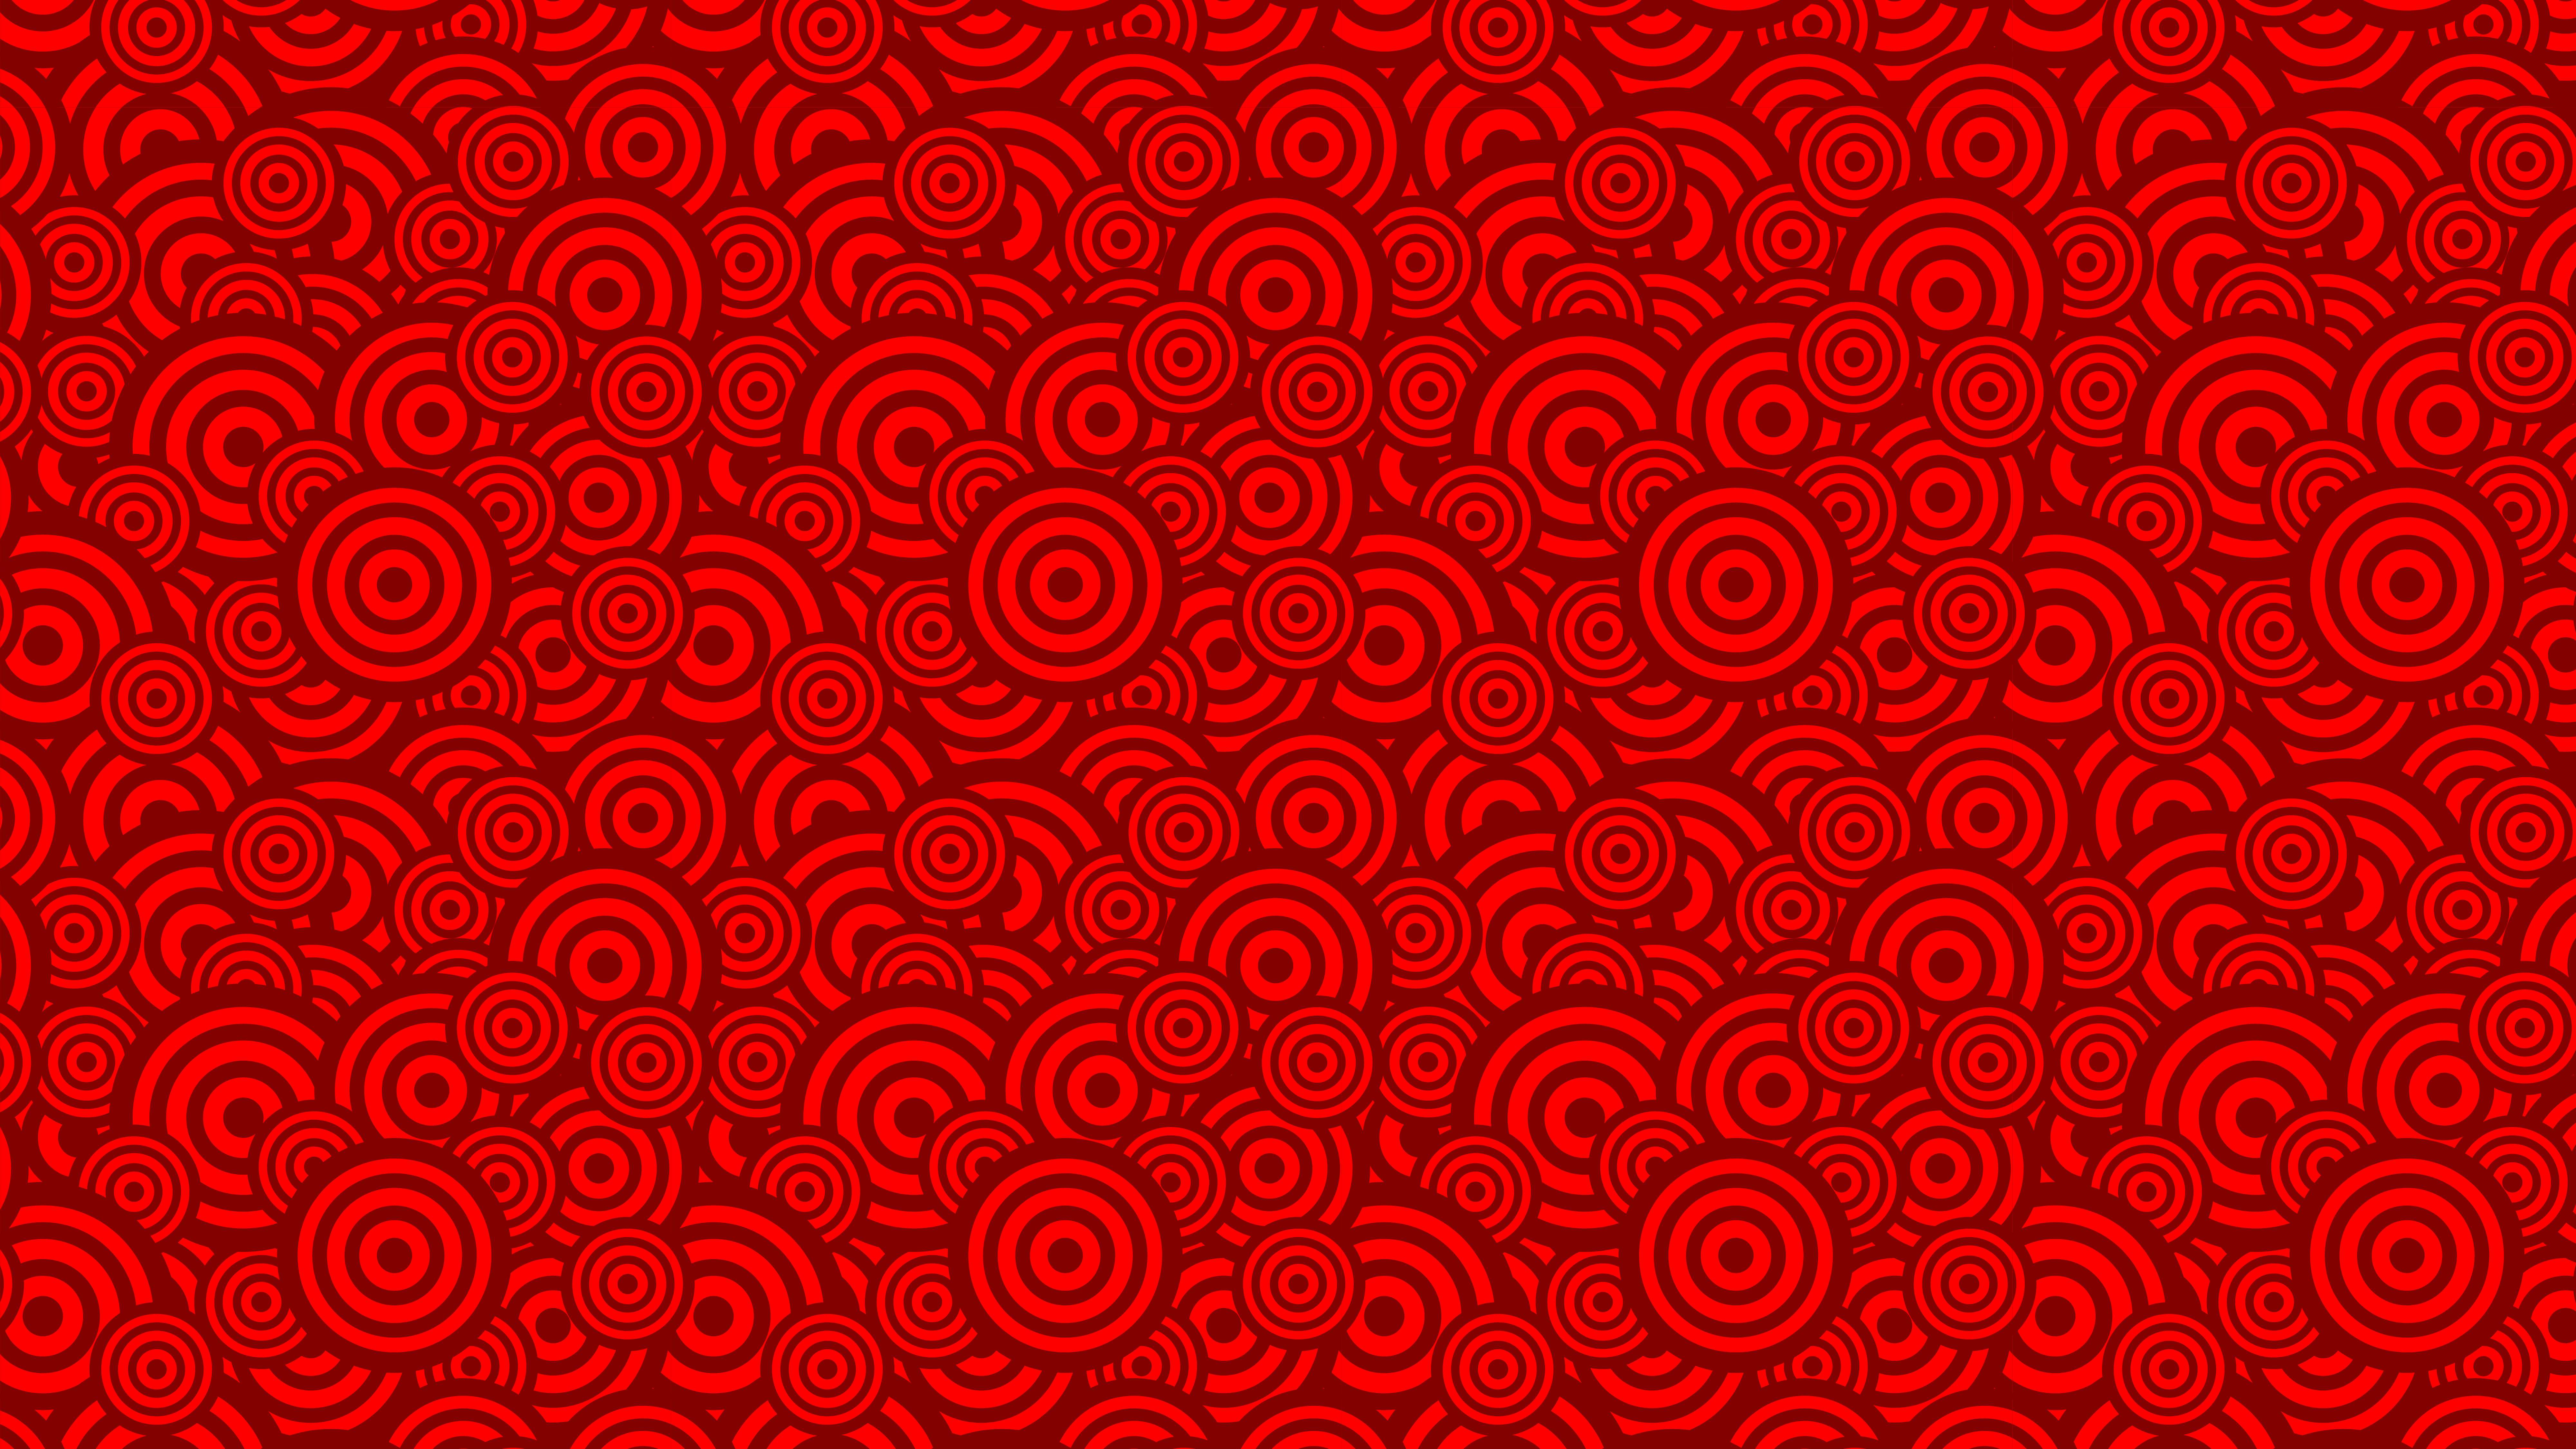 Free Red Seamless Geometric Overlapping Concentric Circles Pattern Graphic